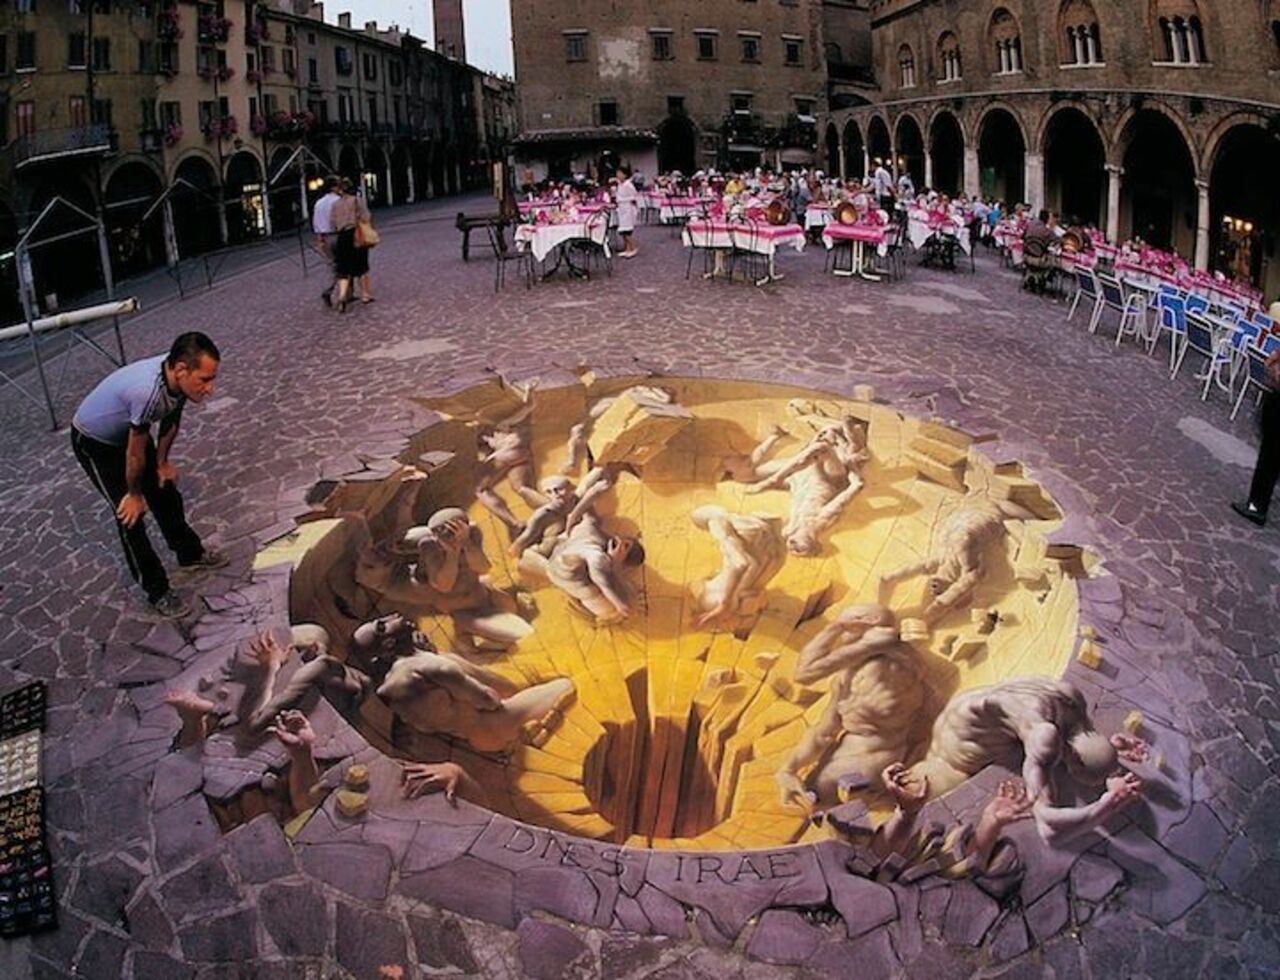 The artist who invented 3D #streetart Find out more: http://buff.ly/1v6SgwJ #urbanart https://t.co/M0LRz5pR3w